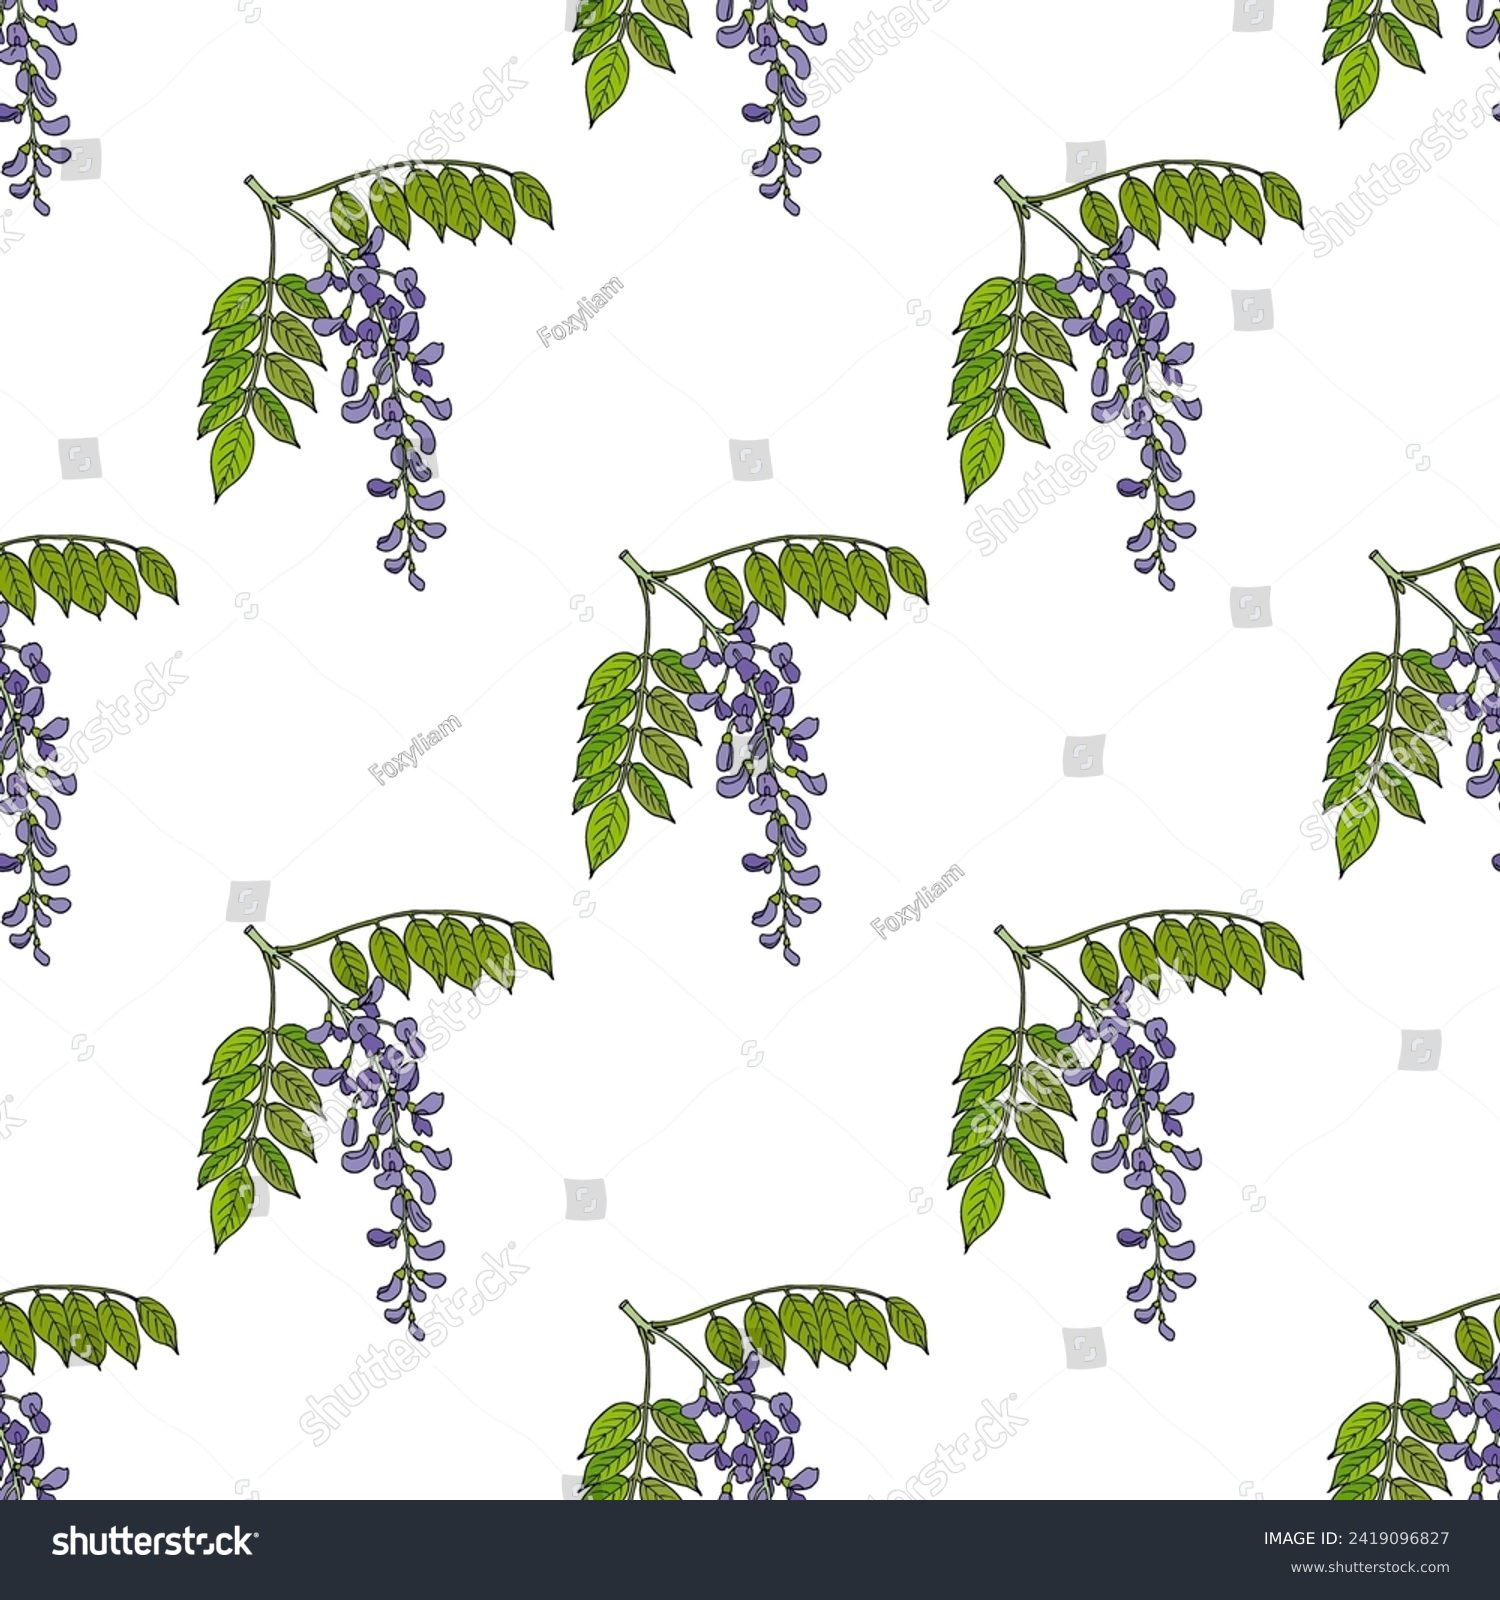 SVG of Seamless pattern with hand drawn chinese wisteria (wisteria sinensis), medicinal and ornamental plant. Vector illustration svg